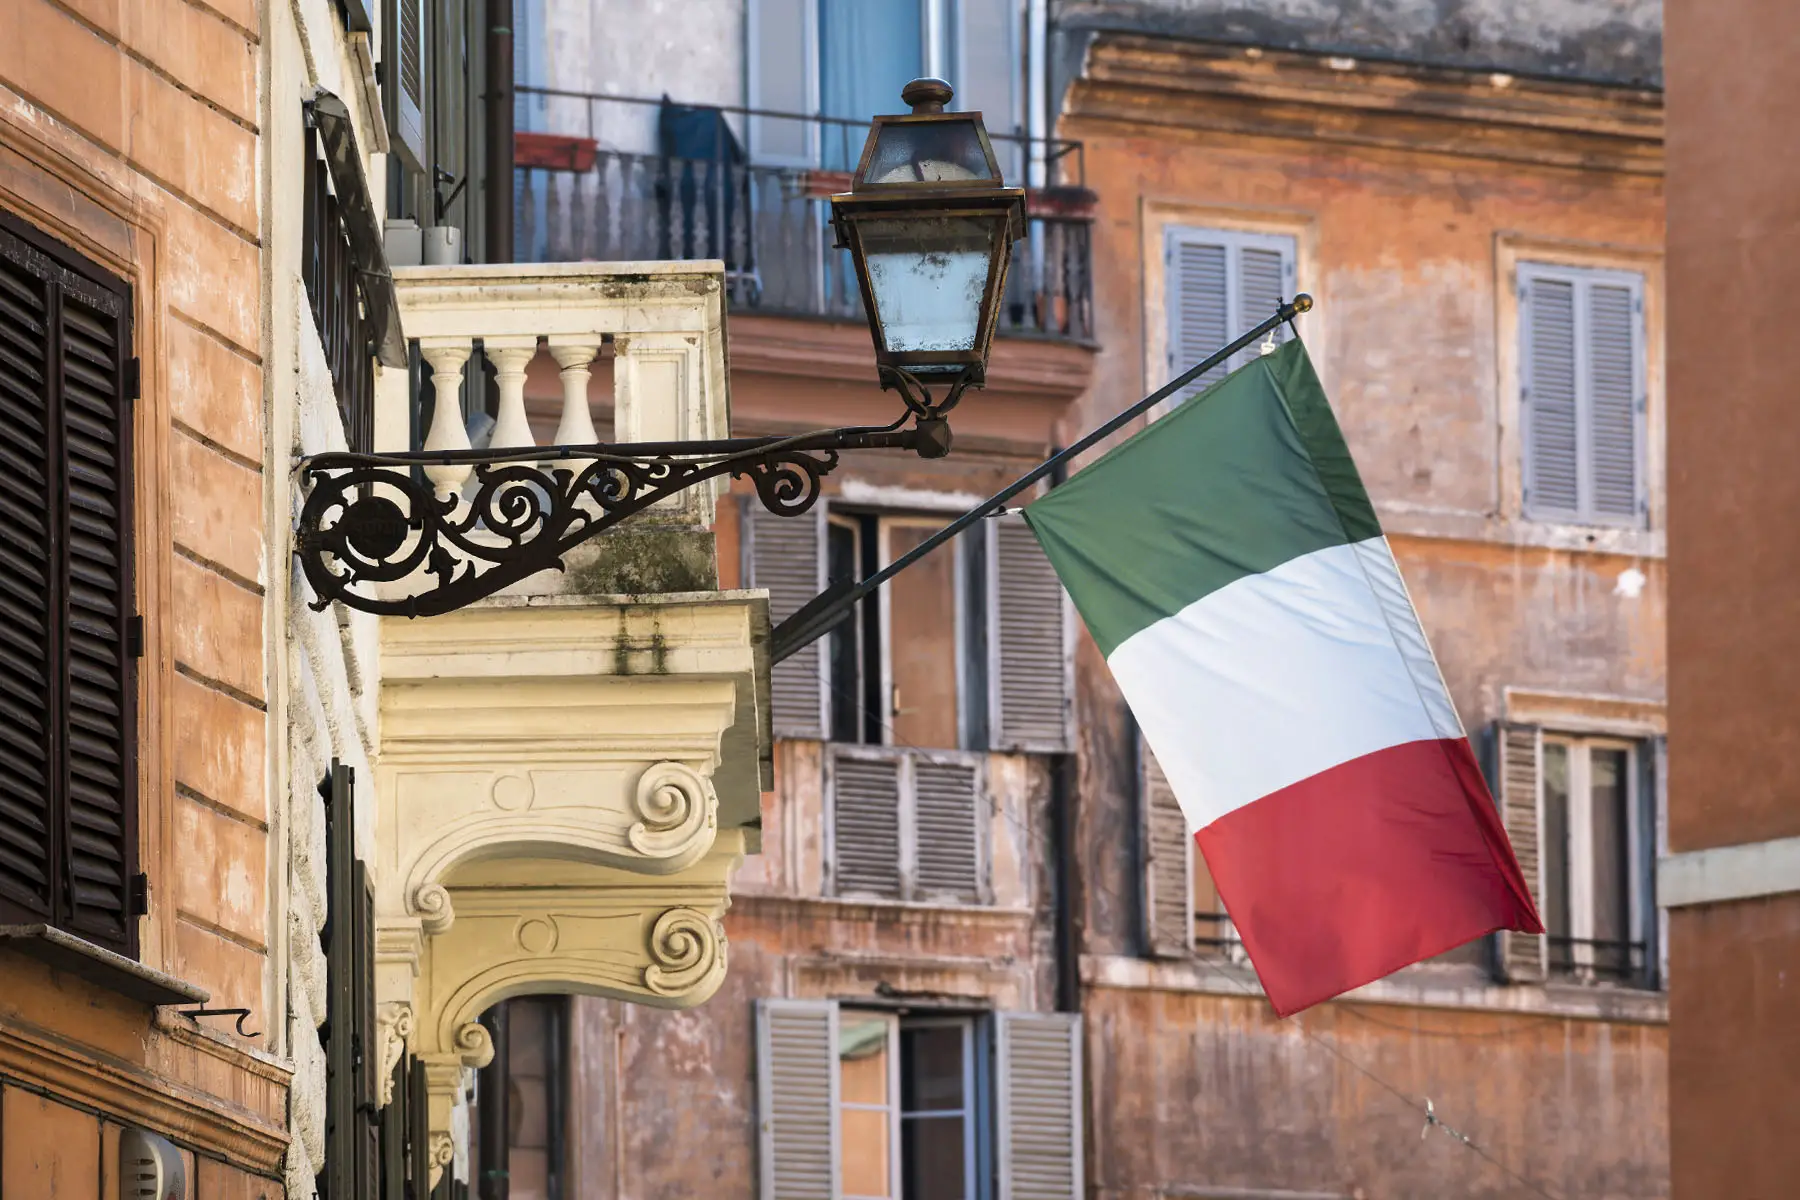 The Italian flag flying outside on a street near Campo di' Fiori in Rome, Italy.